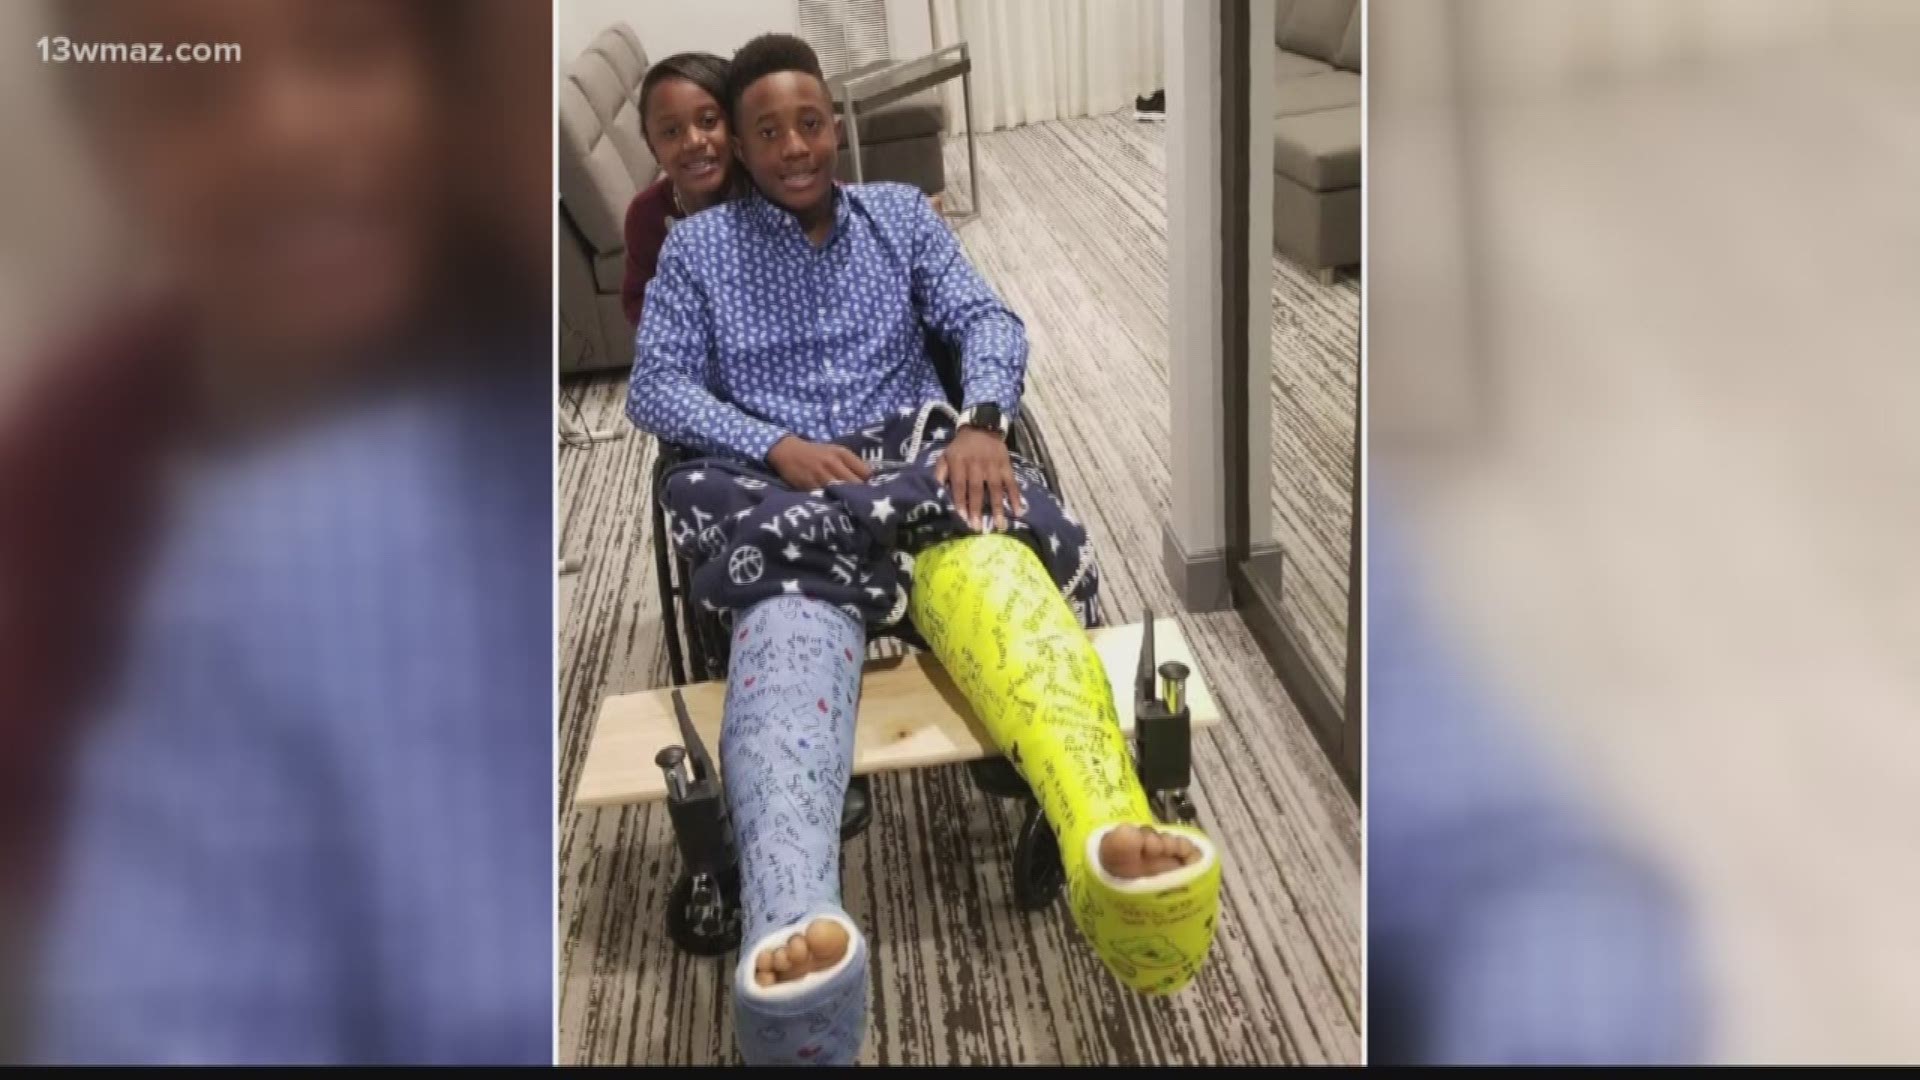 Last year a normal track meet changed Darren Willis' life forever. He broke both of his legs, but Macon's children's hospital helped get him walking again.